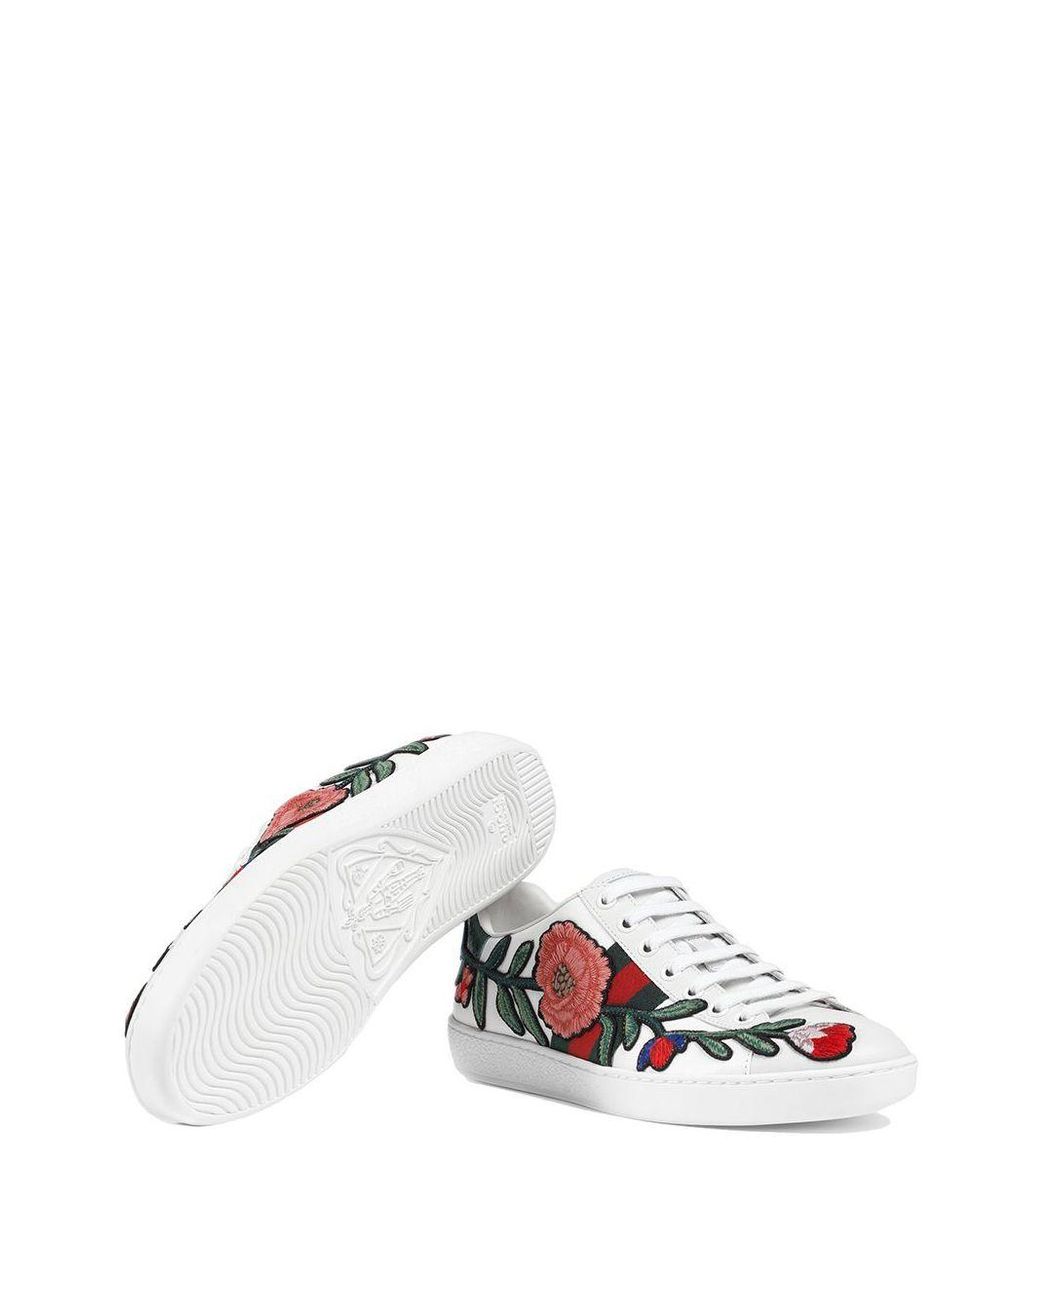 gucci ace embroidered sneaker price